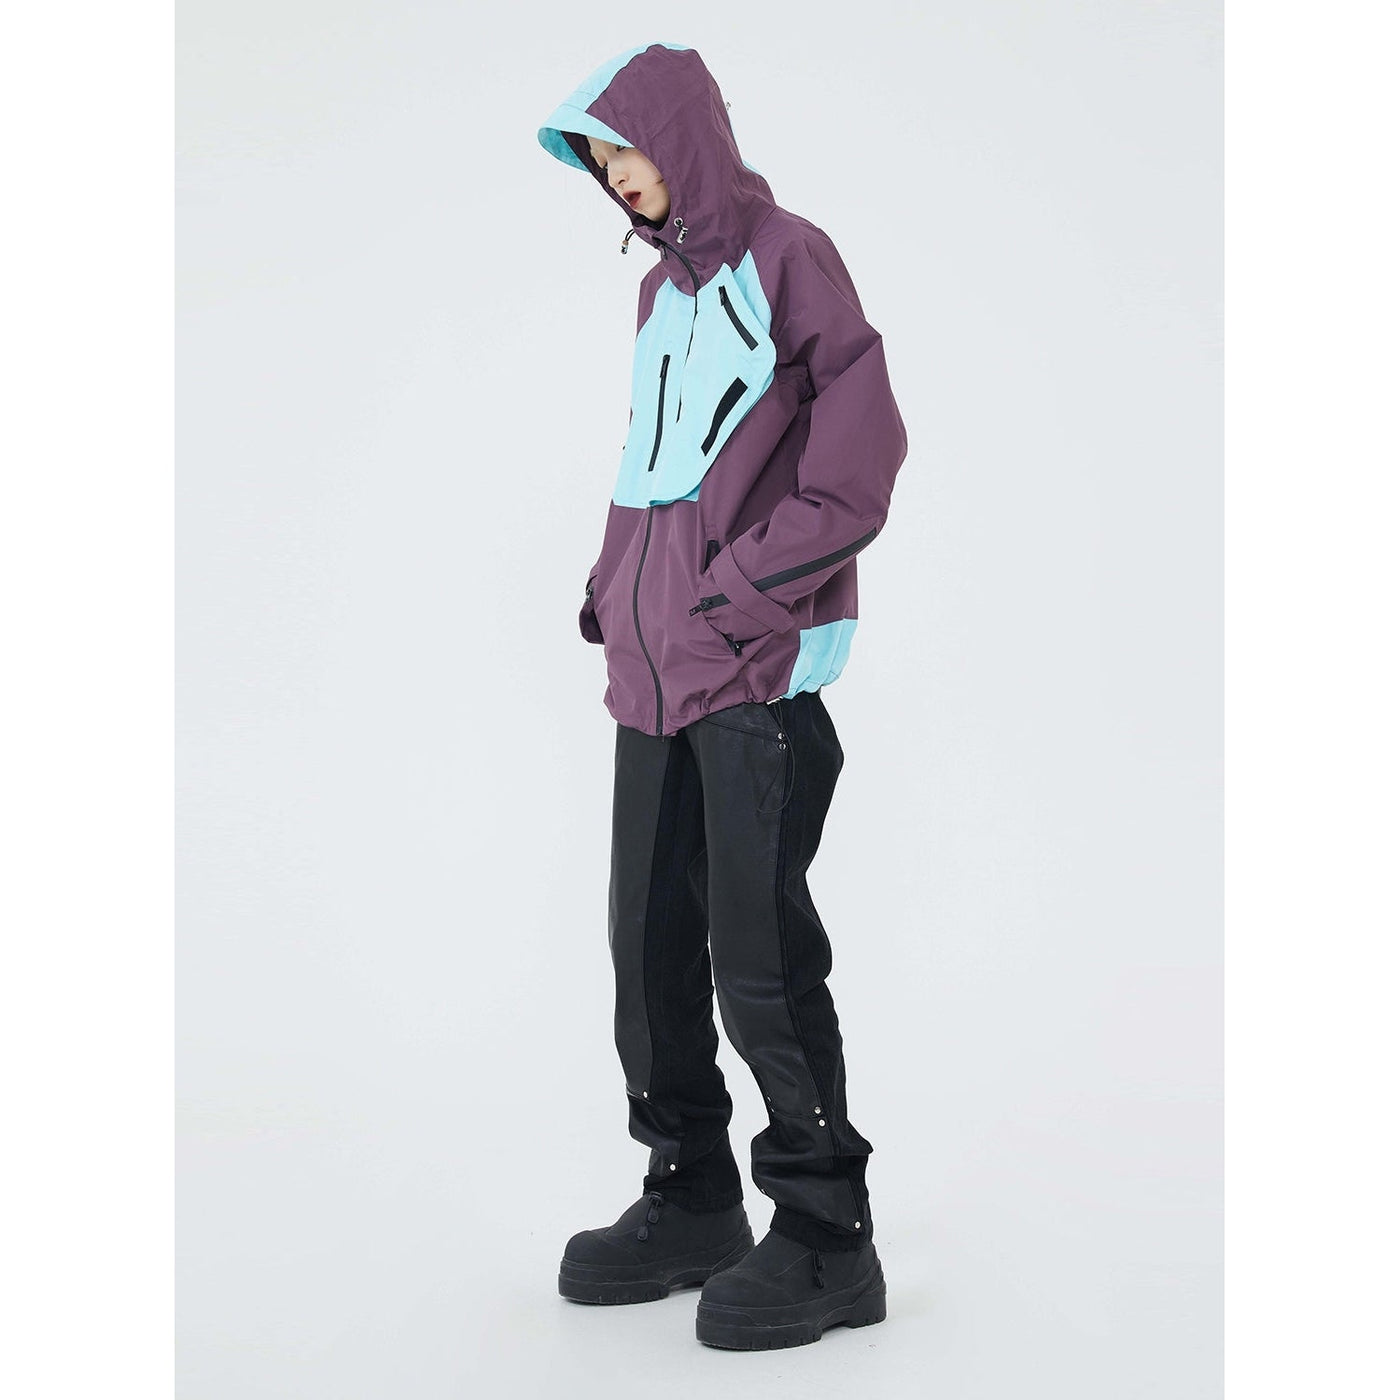 Cutout Style Windbreaker Jacket Korean Street Fashion Jacket By Made Extreme Shop Online at OH Vault